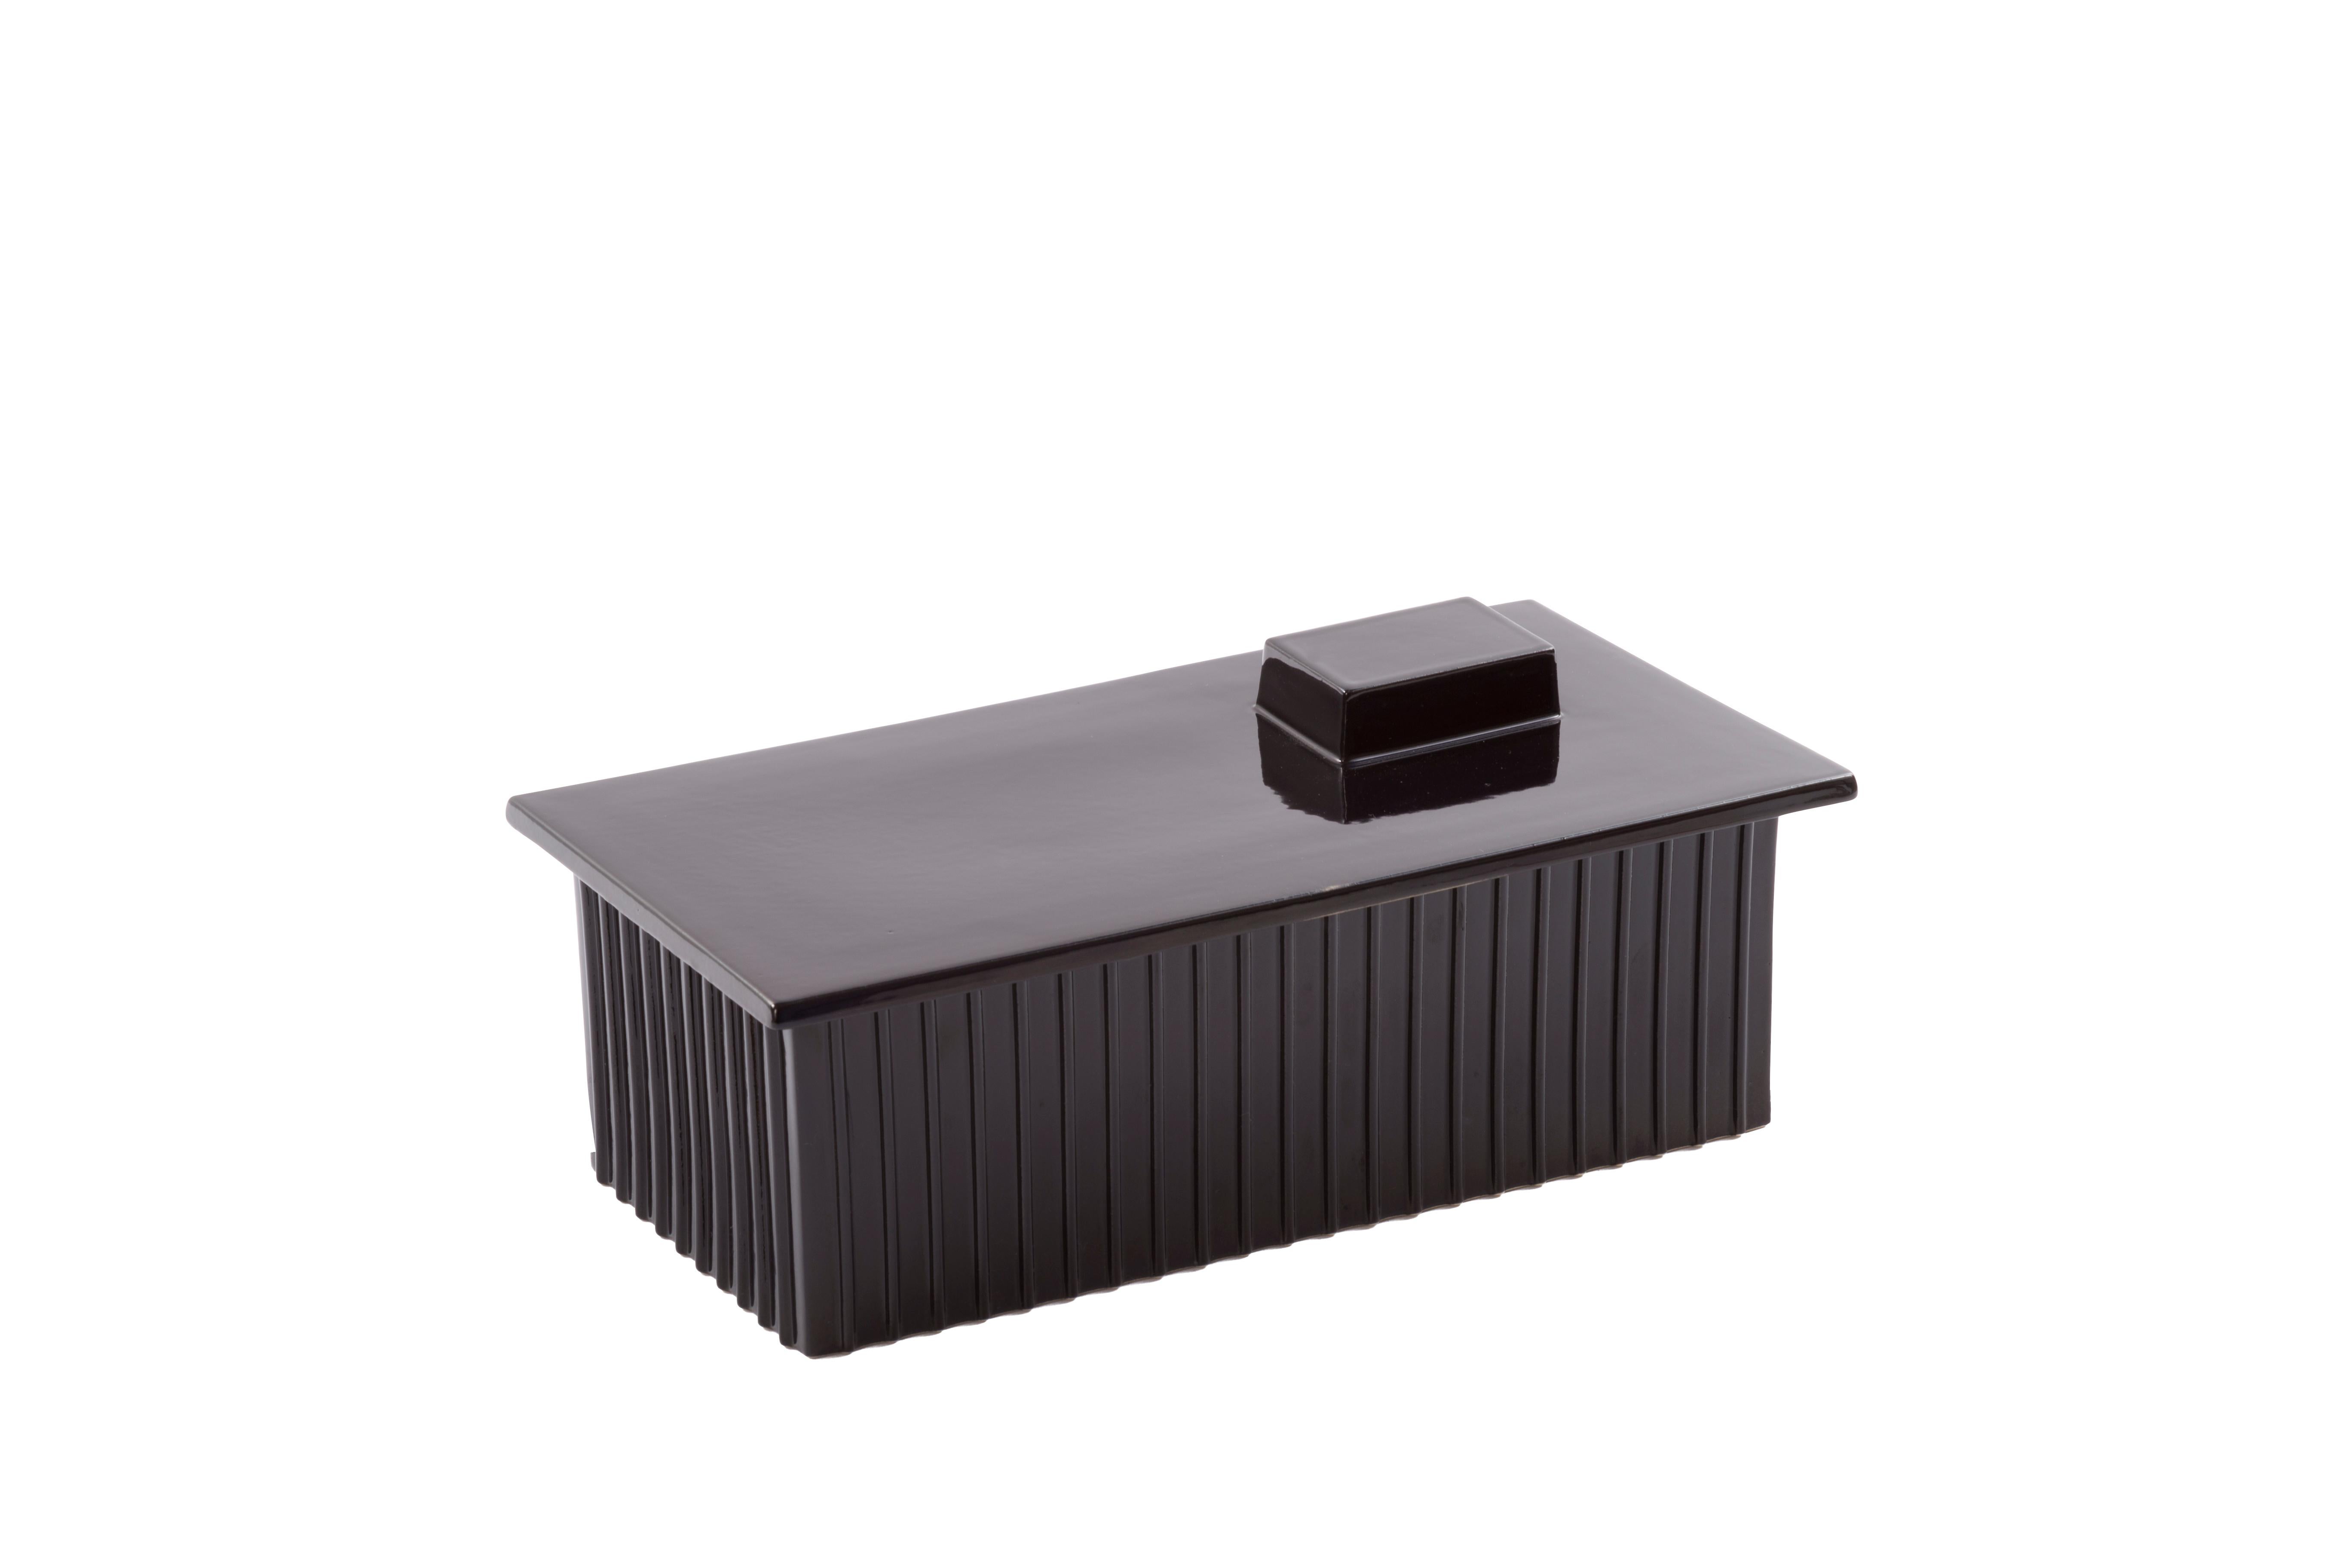 Building big black box by Pulpo
Dimensions: D 32.5 x W 17 x H 13 cm
Materials: Ceramic

Also available in different colours.

This building boxes bring to mind the Industrial areas so familiar within our urban landscapes. An Industrial